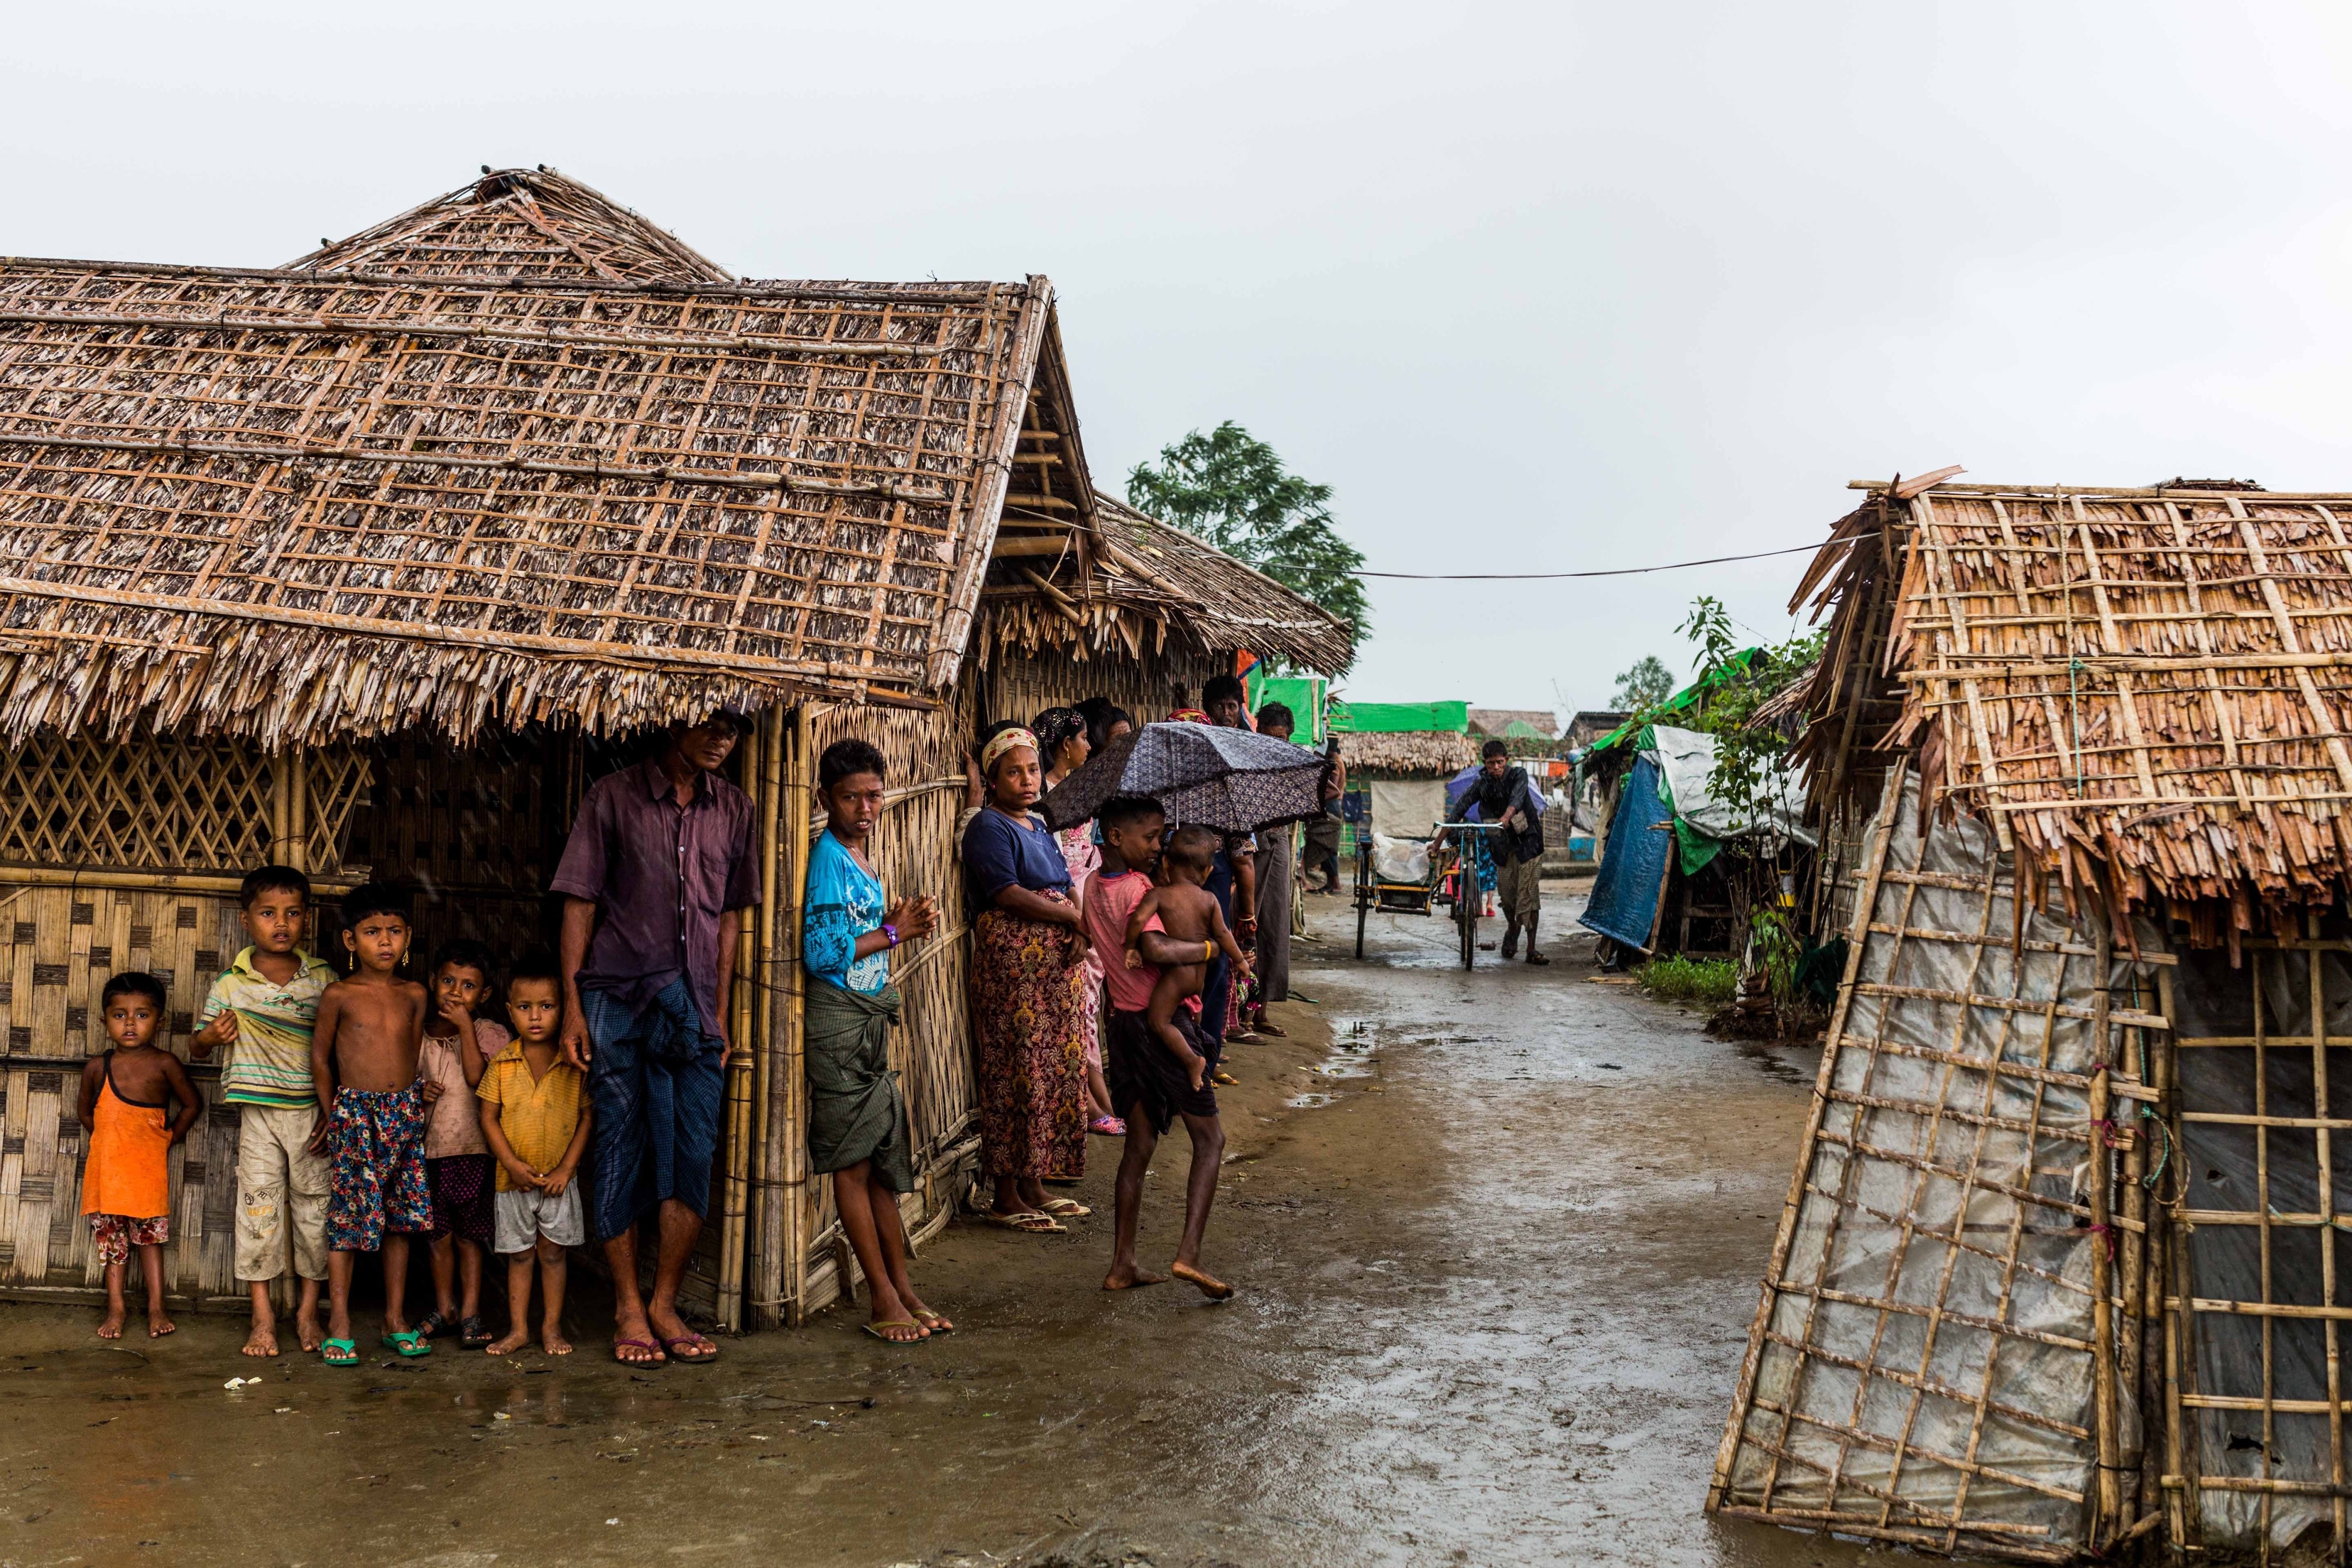 Rohingya refugees seek shelter from the monsoon rains inside a camp for internally displaced persons outside Sittwe, in Burma's Rakhine state, on July 17, 2015 (Asanka Brendon Ratnayake—Anadolu Agency/Getty Images)